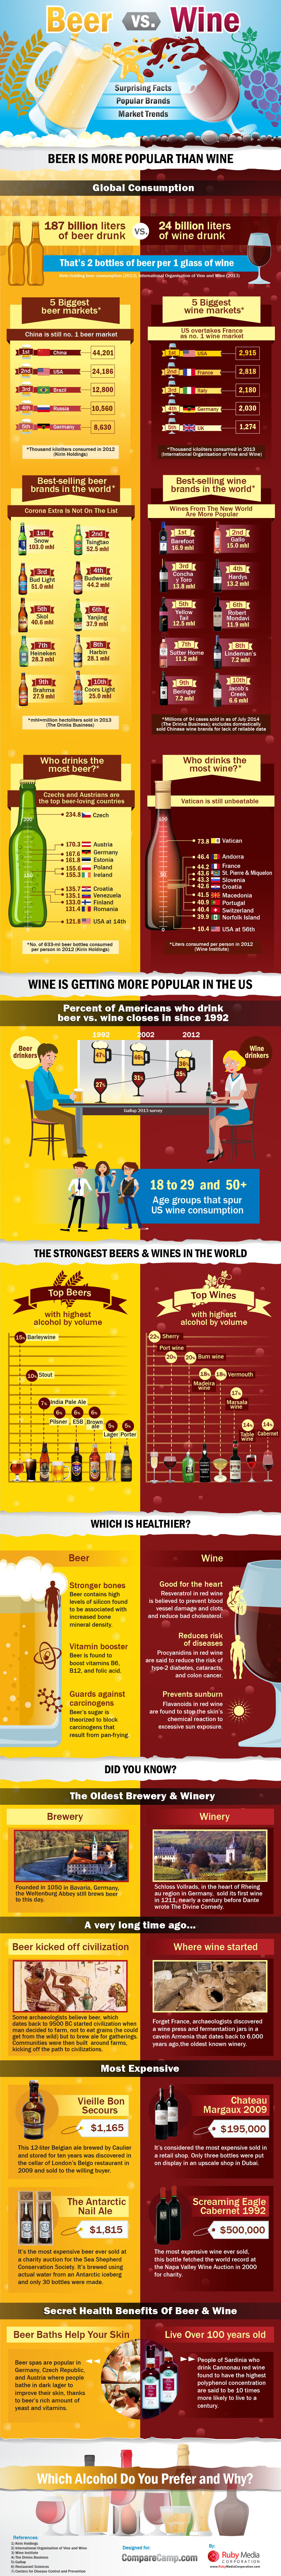 Beer & Wine: Comparison Of Popular Brands, Surprising Facts And Market Trends